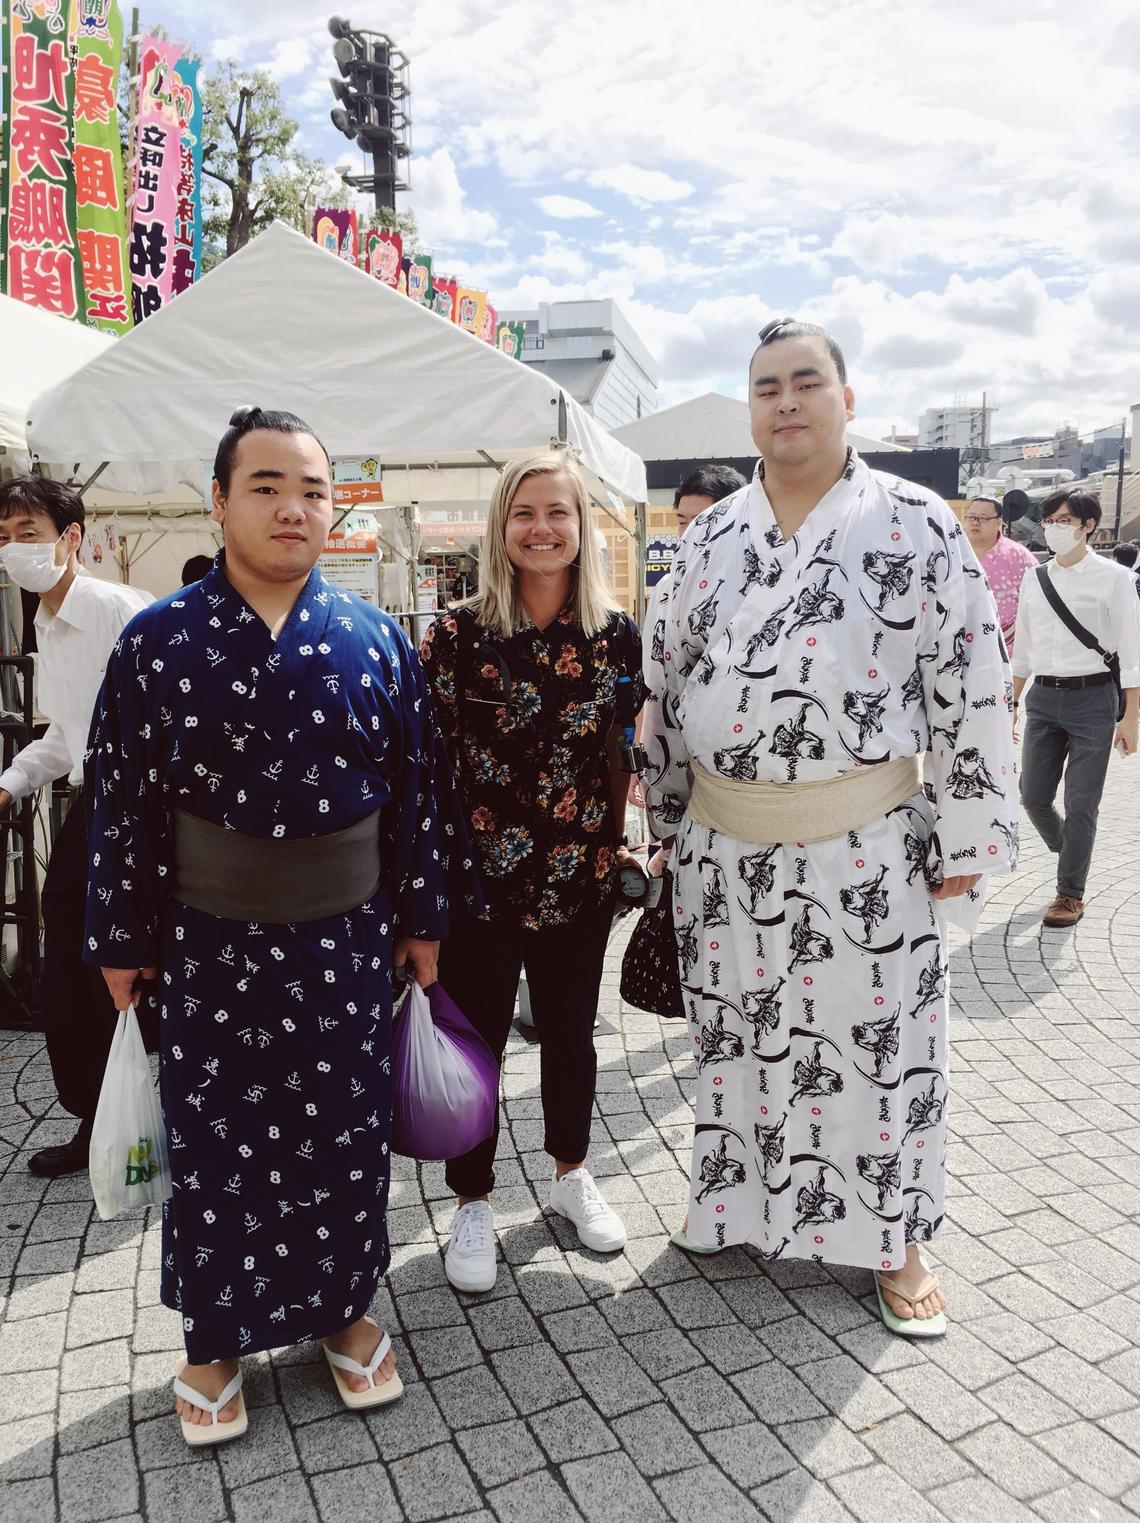 University of Calgary School of Architecture, Planning and Landscape master's grad Ashley Ortlieb says her study abroad experience in Tokyo was amazing. Photos courtesy Ashley Ortlieb